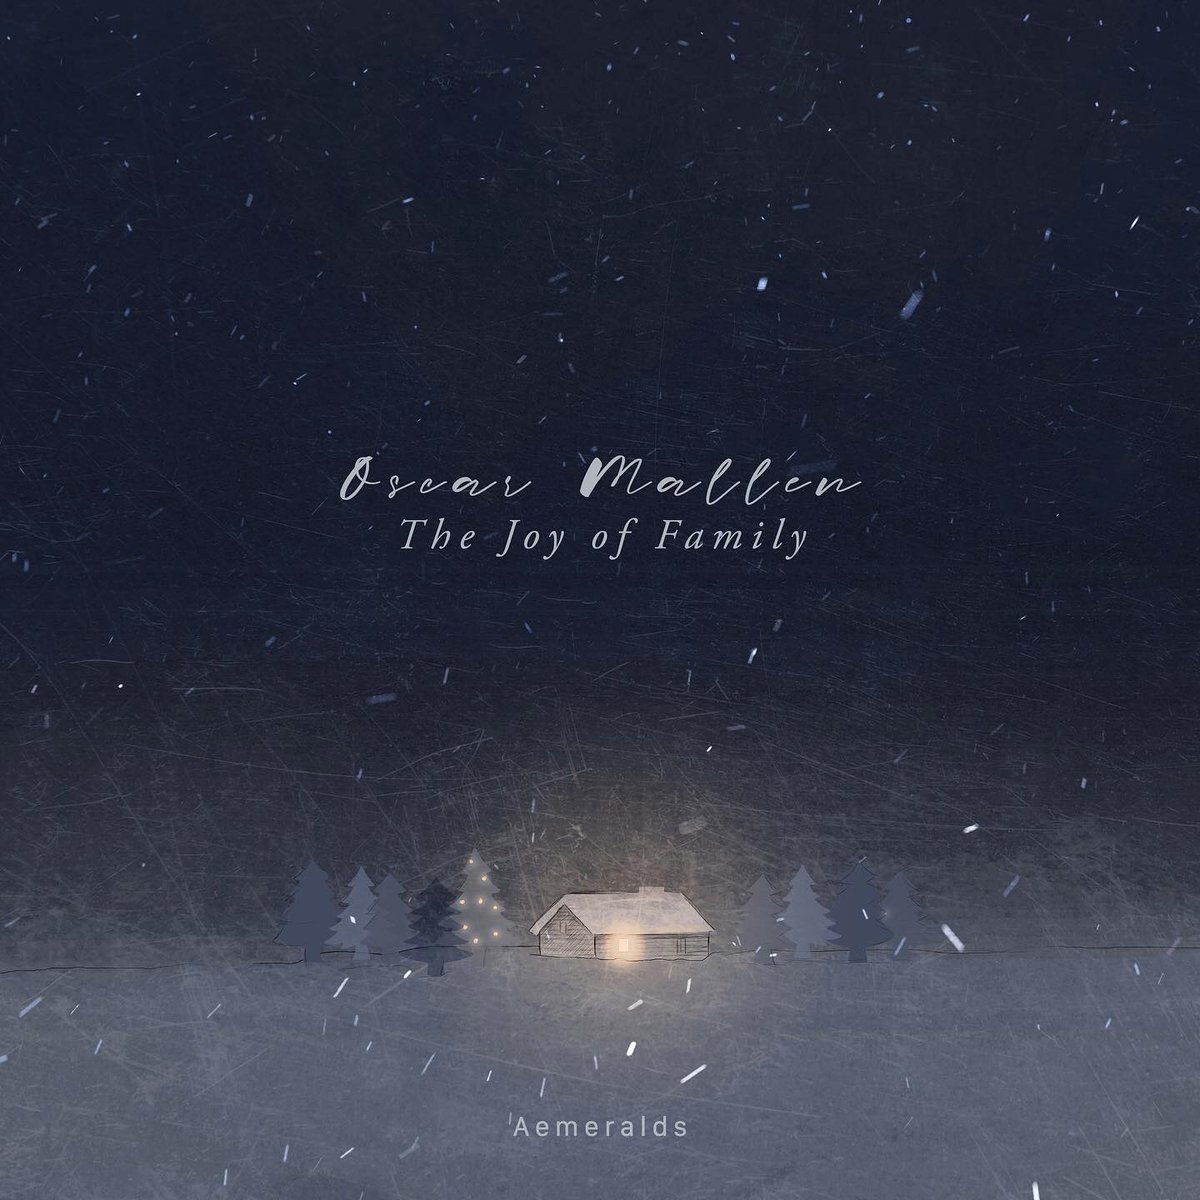 Hi music friends, next Friday I am releasing “The Joy Of Family”, part of @aemeralds compilation “Winter Nights”. Thanks for Pre-save, link: orcd.co/k7onqby Label: aemeralds Artwork: viola_bruning . @spotify @spotifyforartists #calmpiano #pacefulpiano #wintersongs